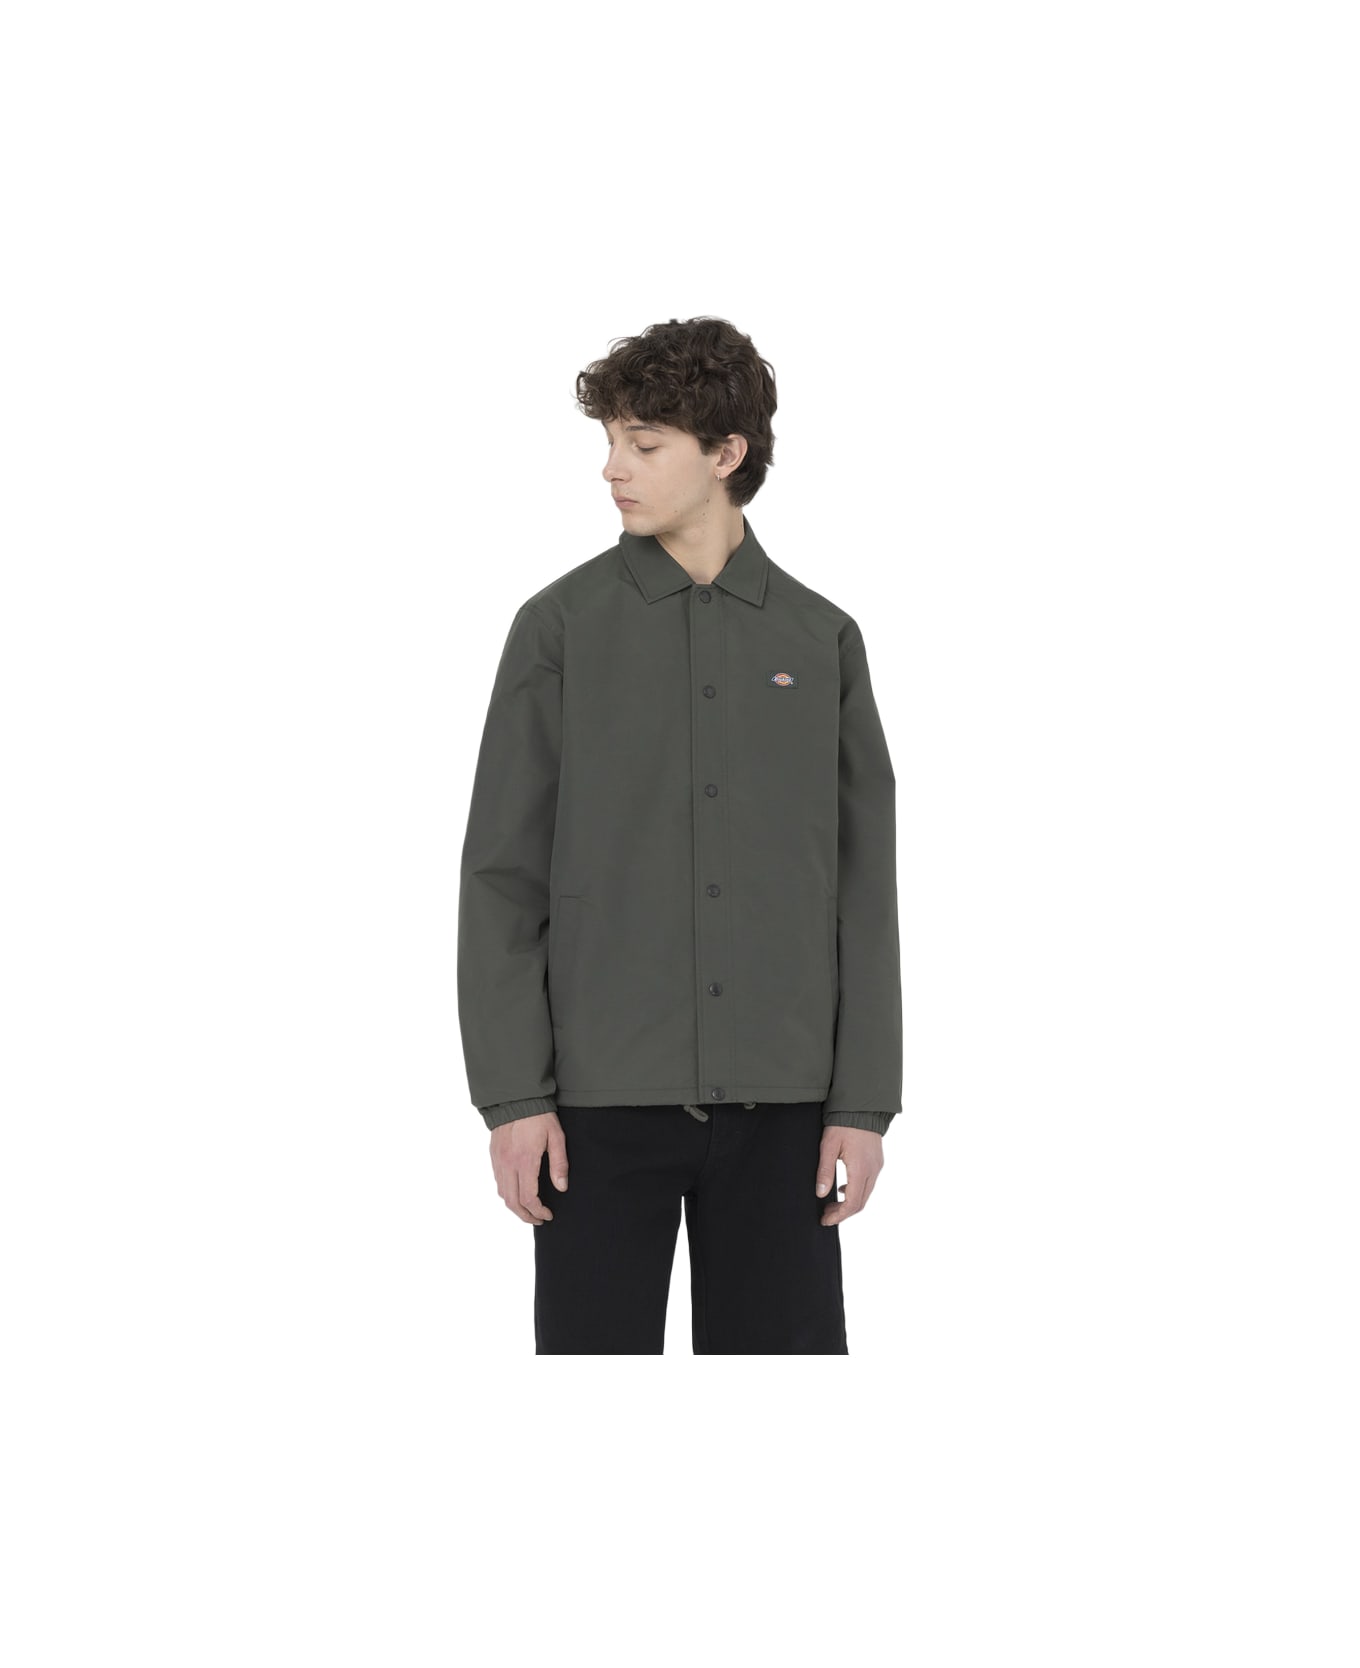 Dickies Oakport Coach - Olive Green